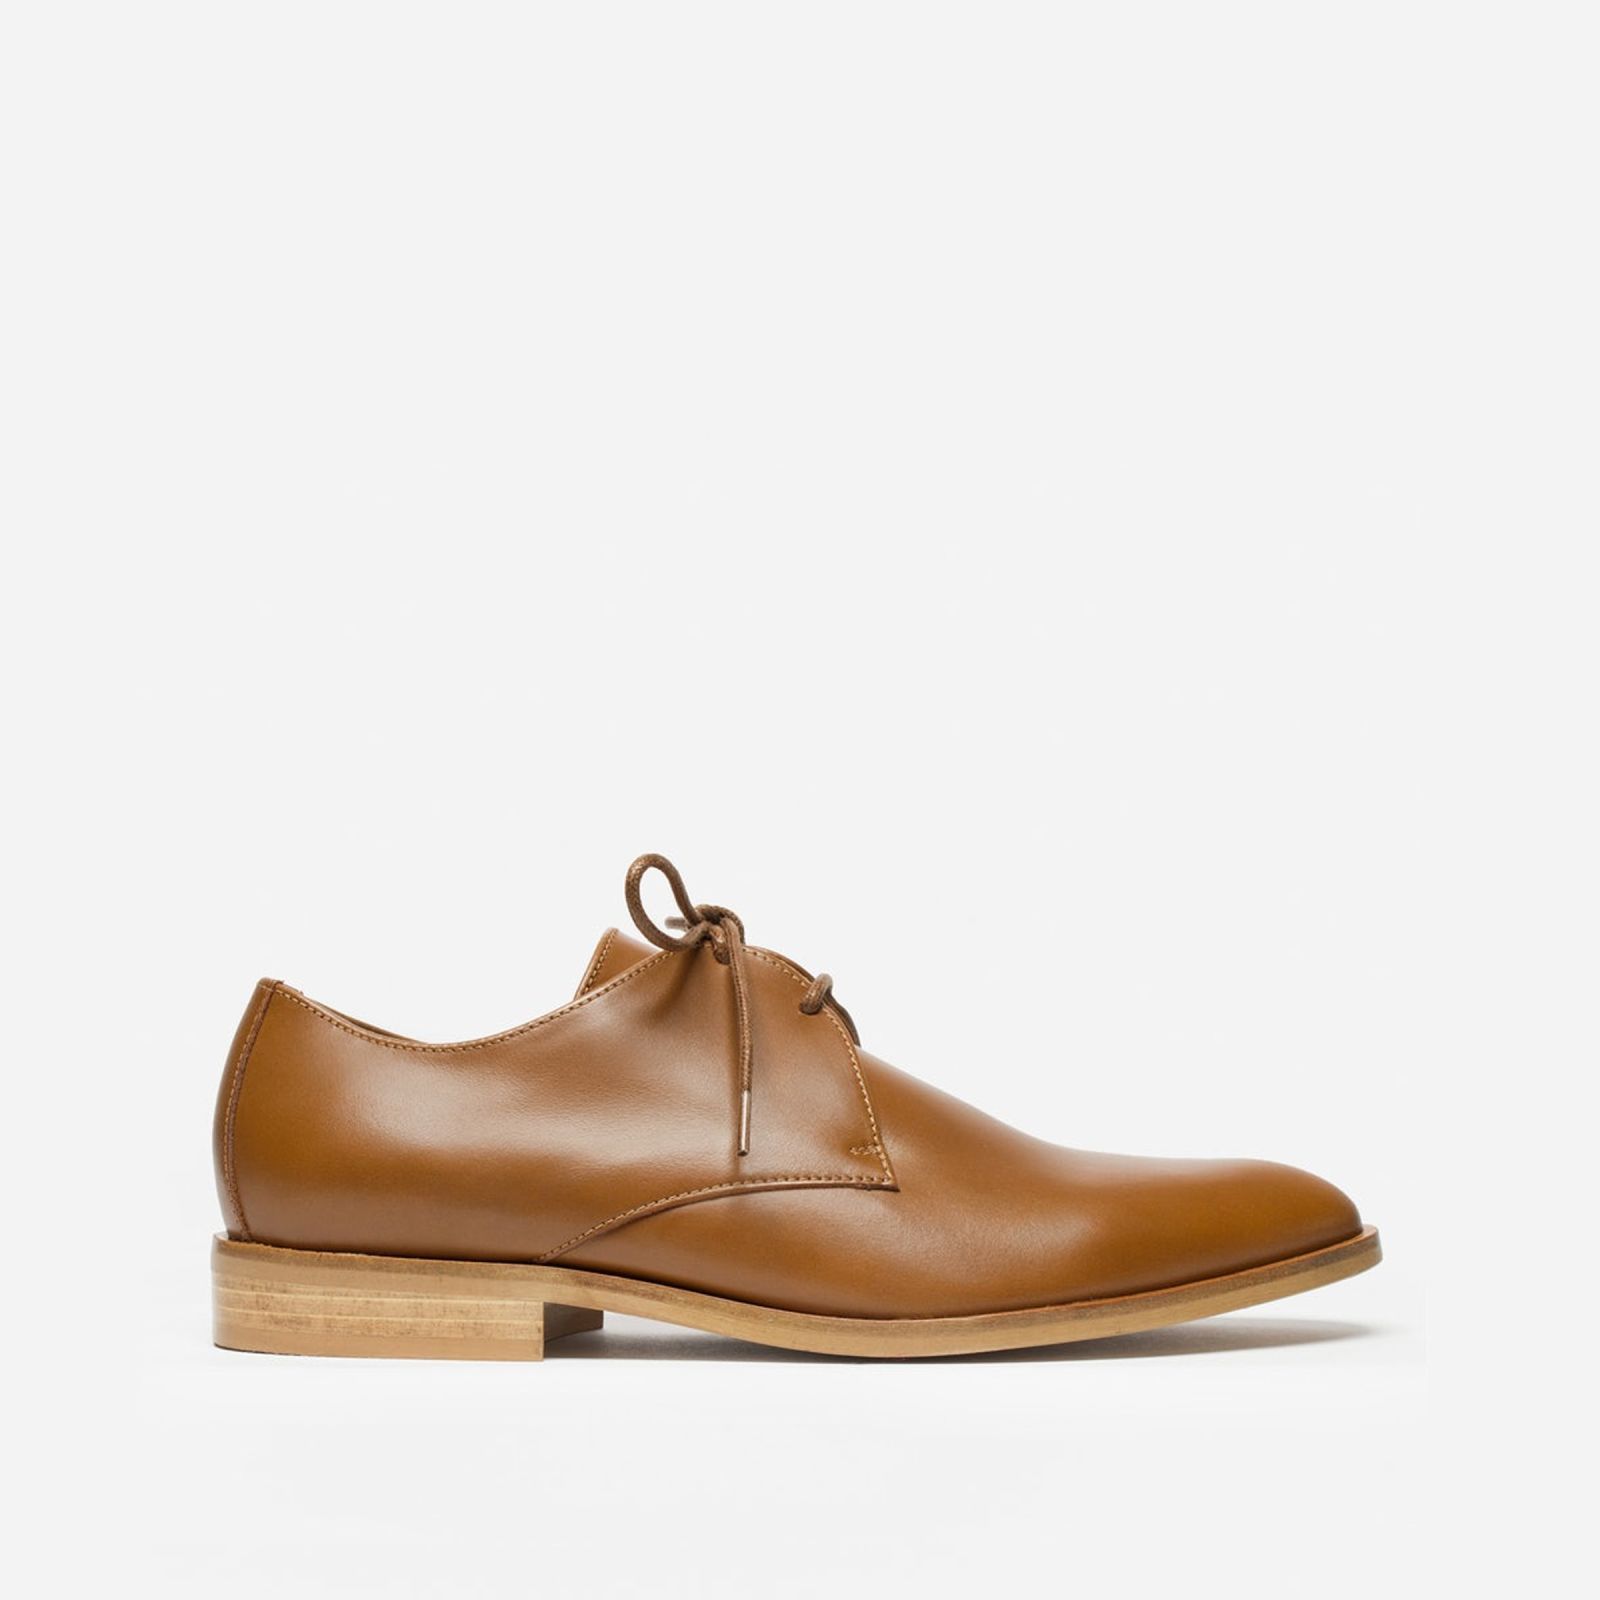 Women's Oxford Shoes by Everlane in Cognac, Size 5 | Everlane